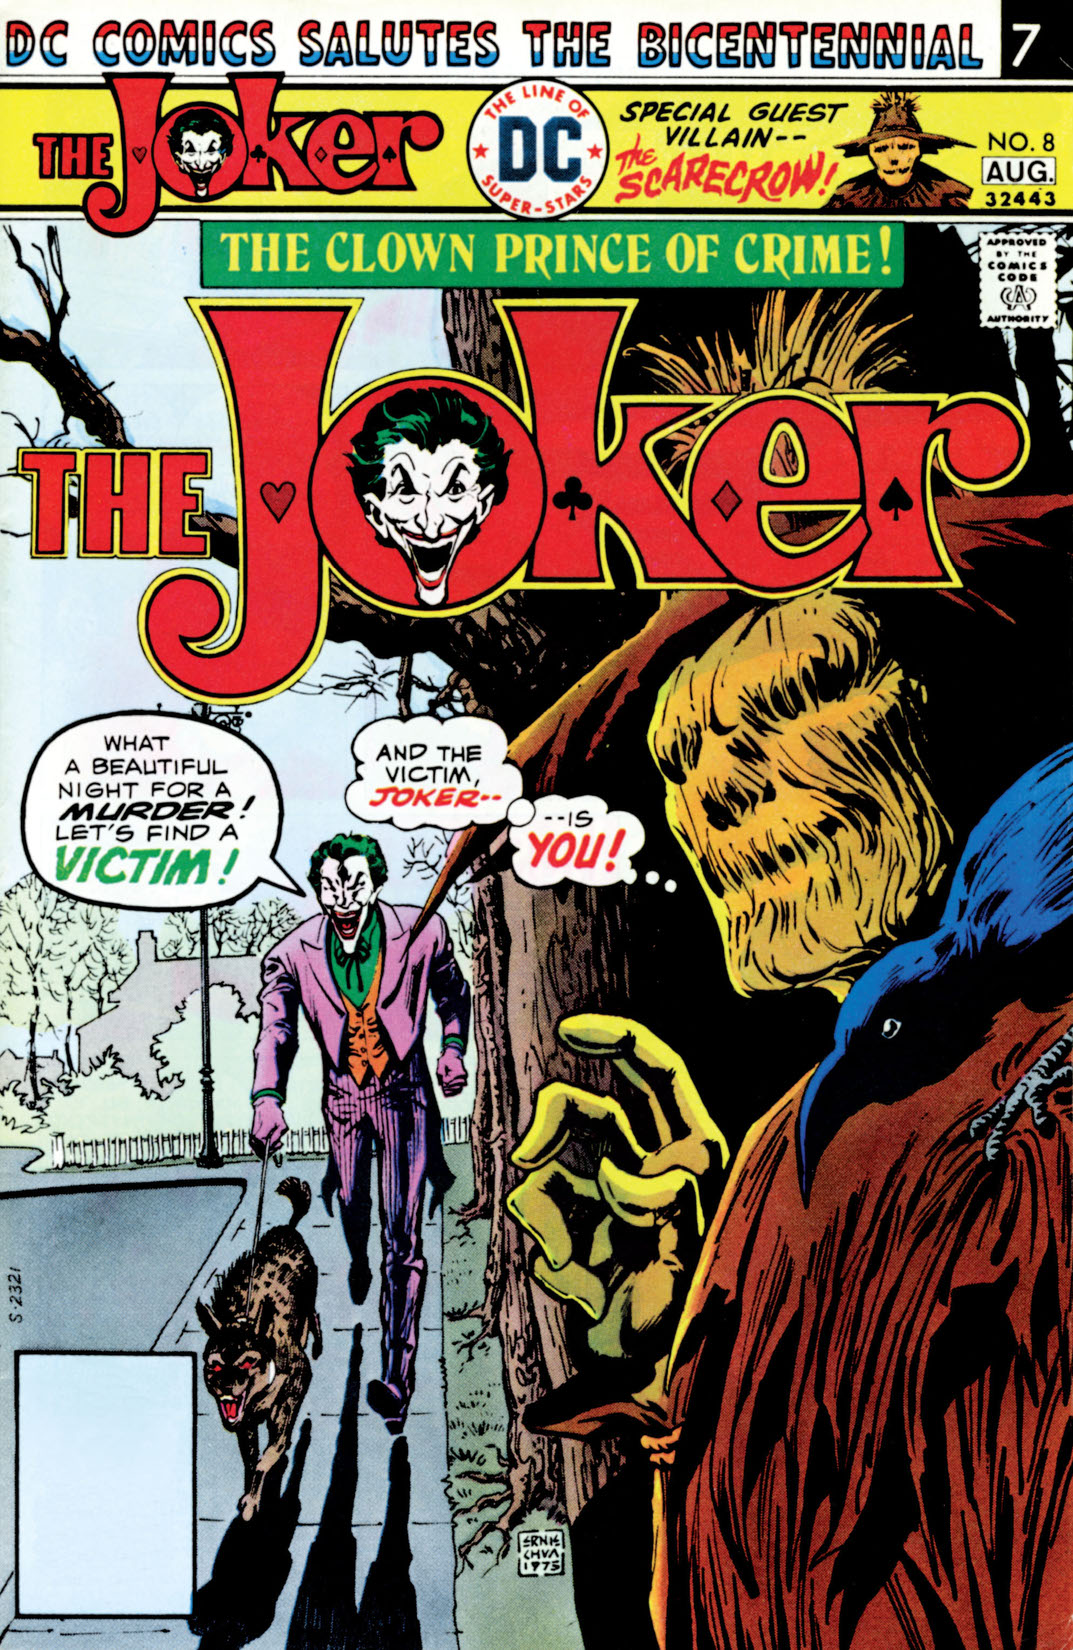 The Joker (1975-) #8 preview images